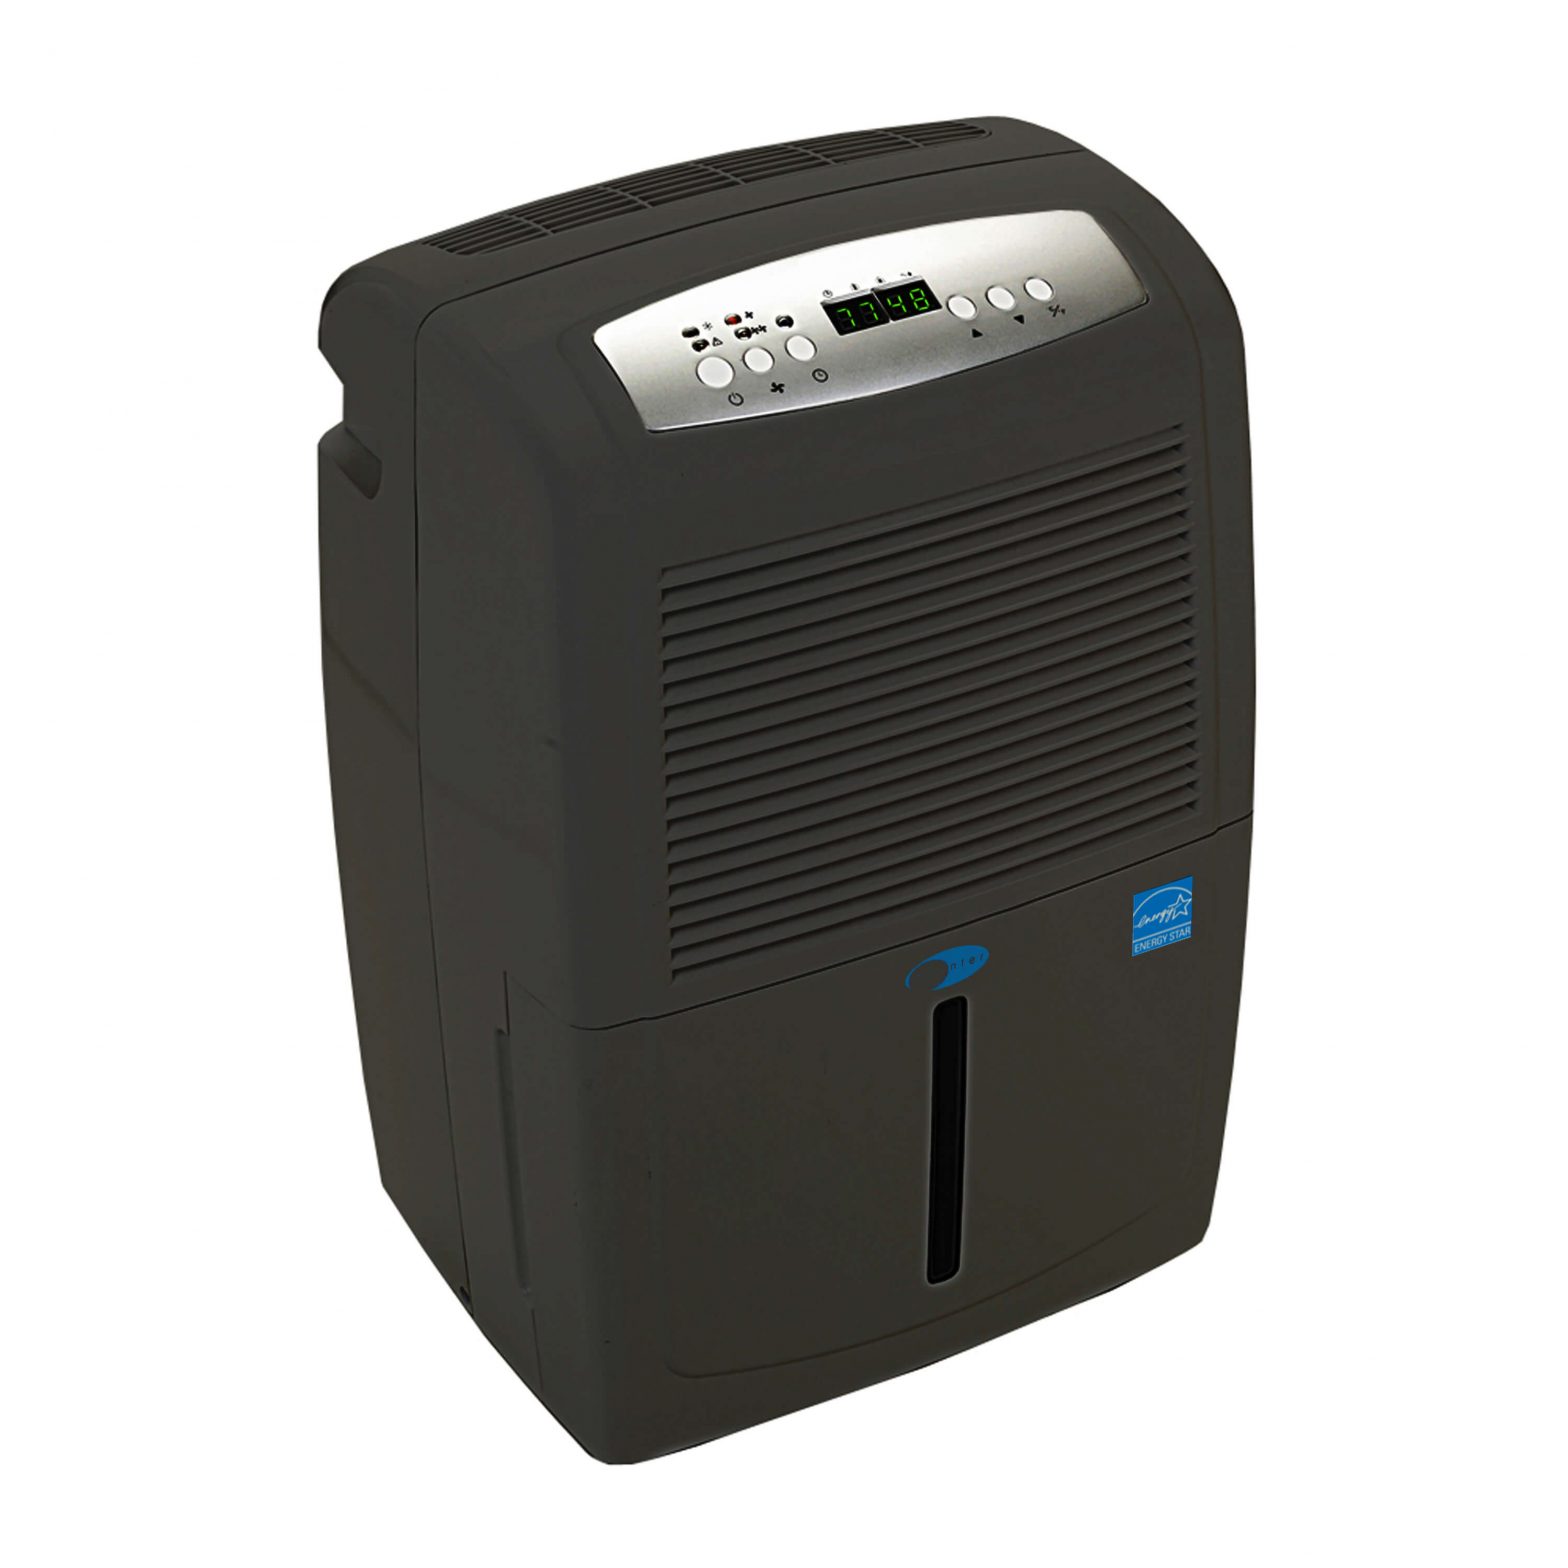 Whynter Energy Star 50 Pint Portable Dehumidifier with Pump / Slate Gray RPD-503SP User Manual